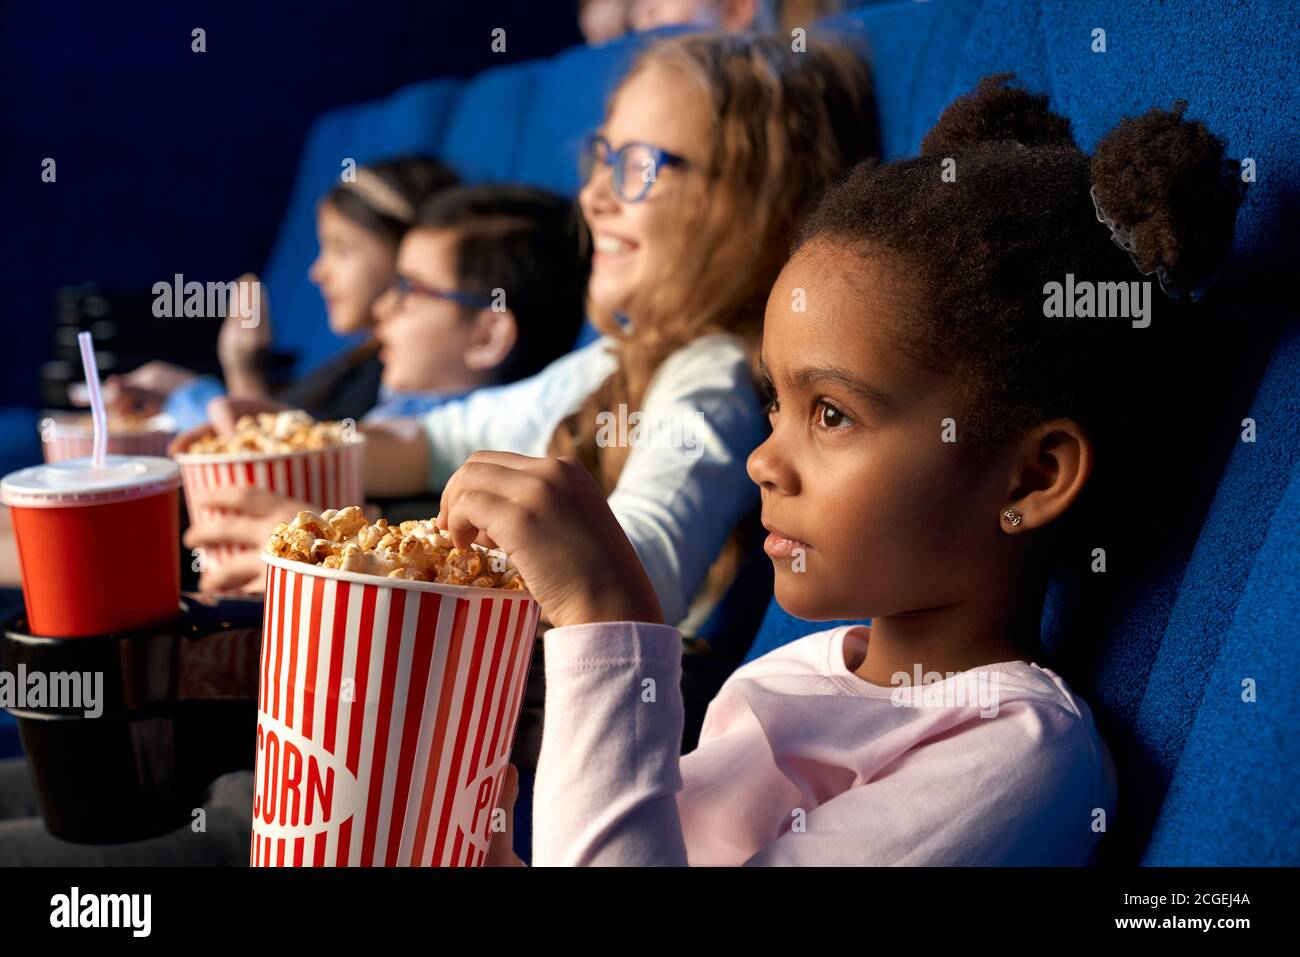 Adorable little female kid sitting with friends, eating popcorn and enjoying time. Beautiful concentrated african girl with funny hairstyle watching movie in cinema. Concept of entertainment, leisure. Stock Photo